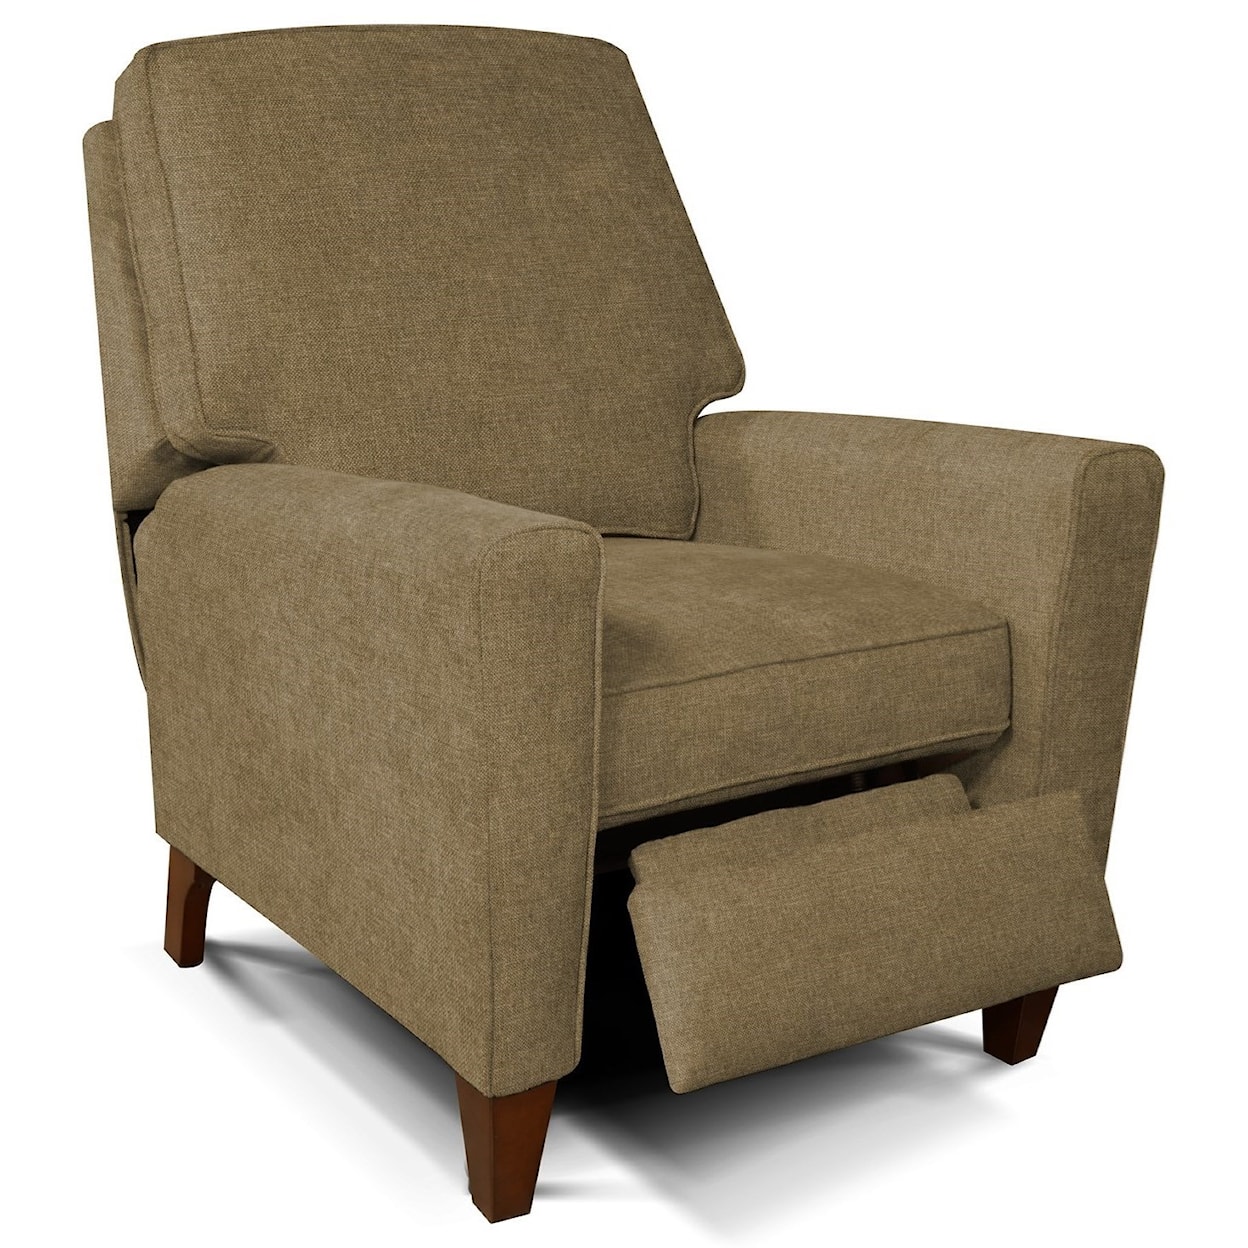 England 6200/LS Series Living Room Motion Chair